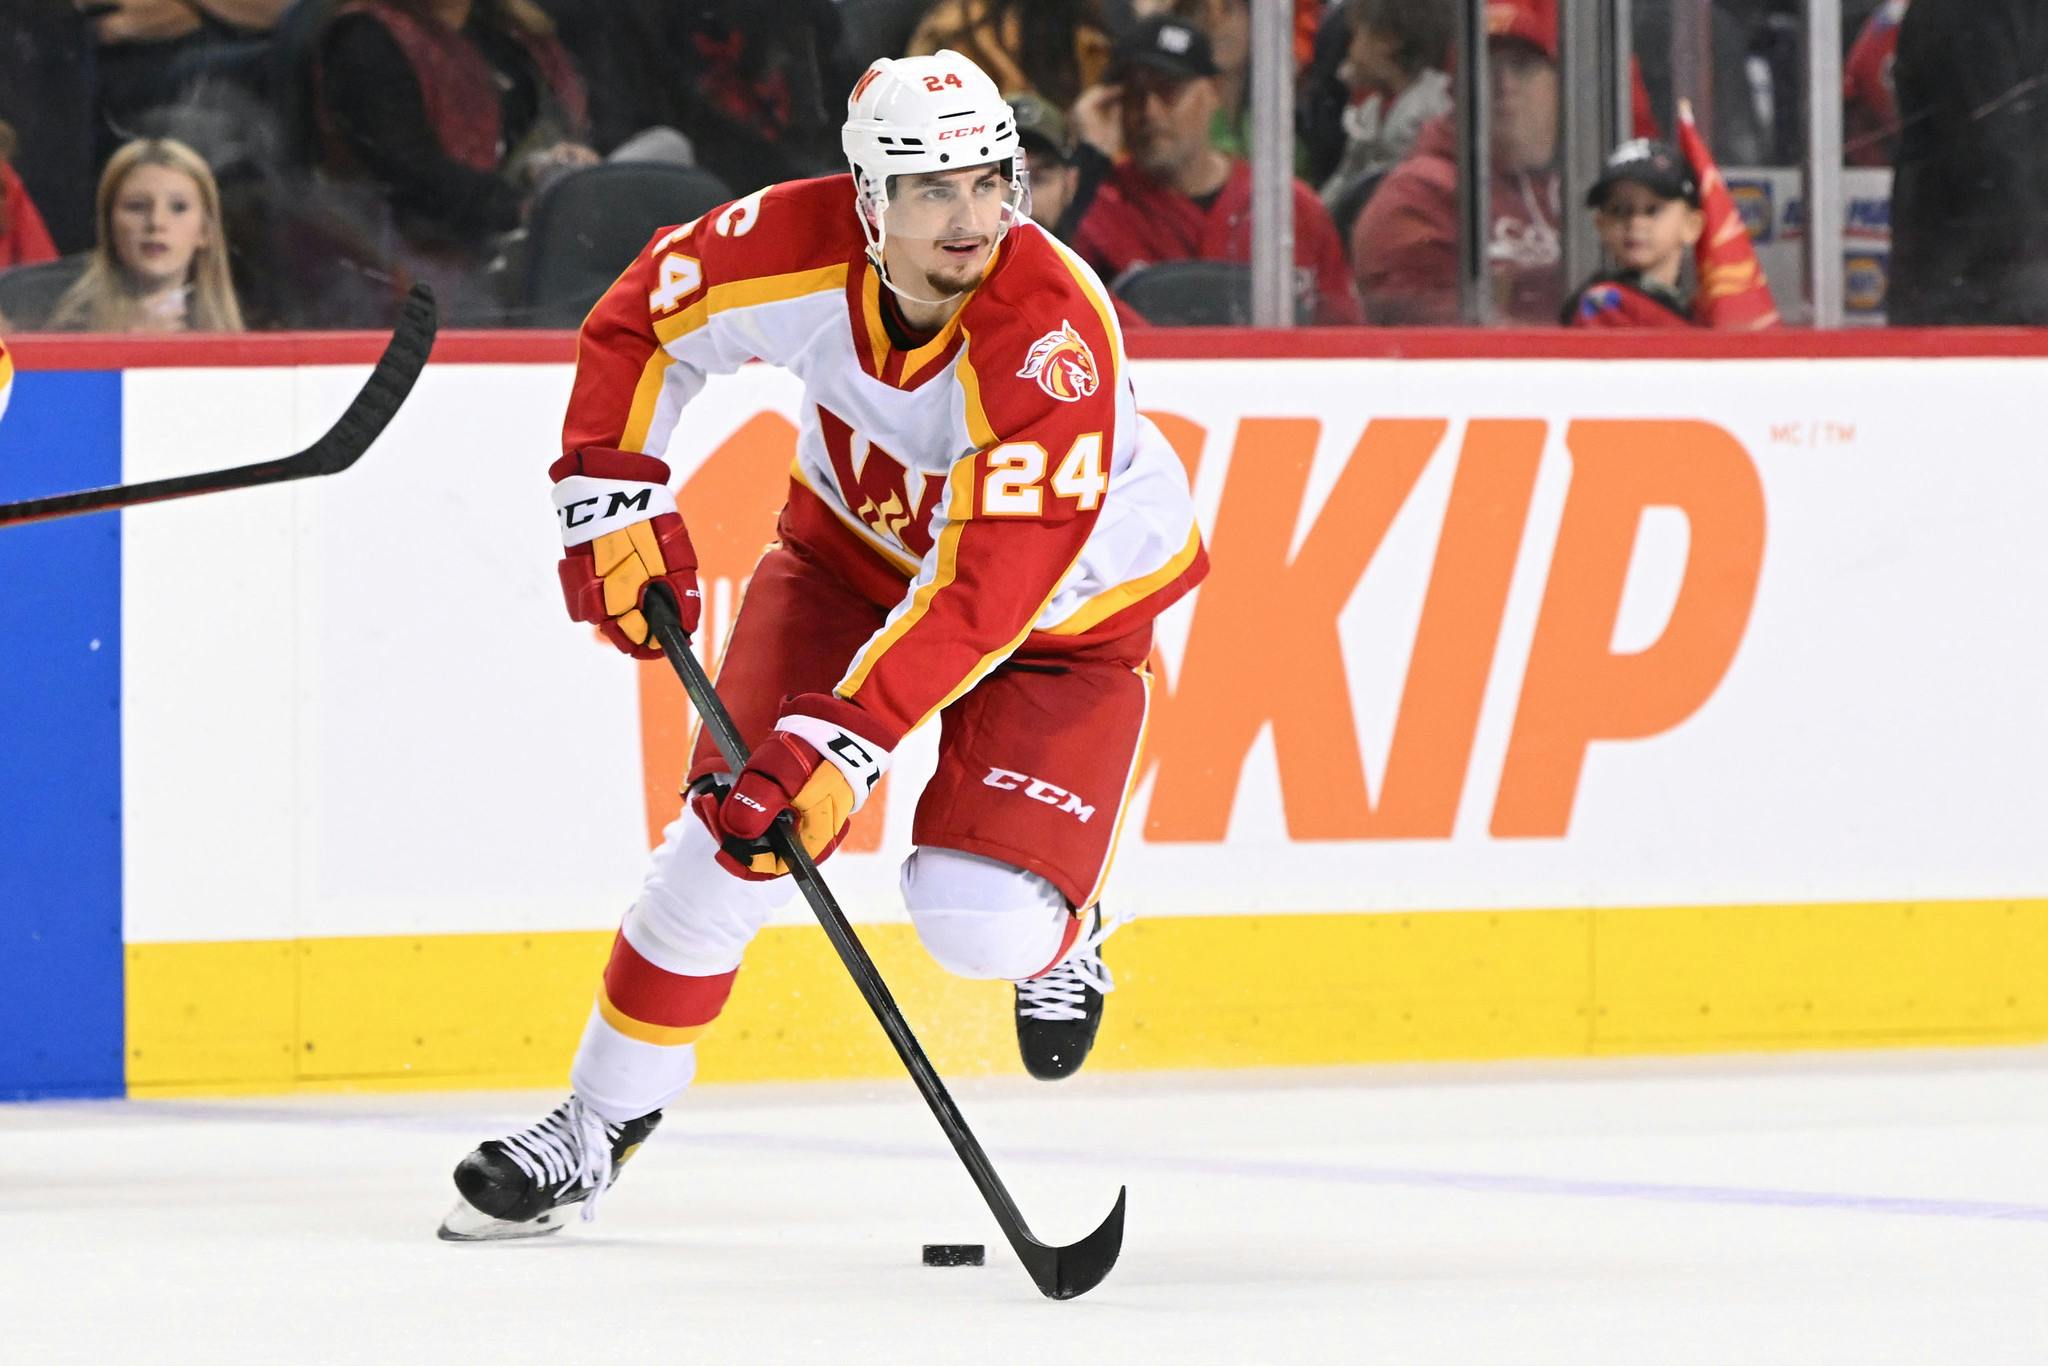 Calgary Flames reduce roster, place players on waivers, release PTOs